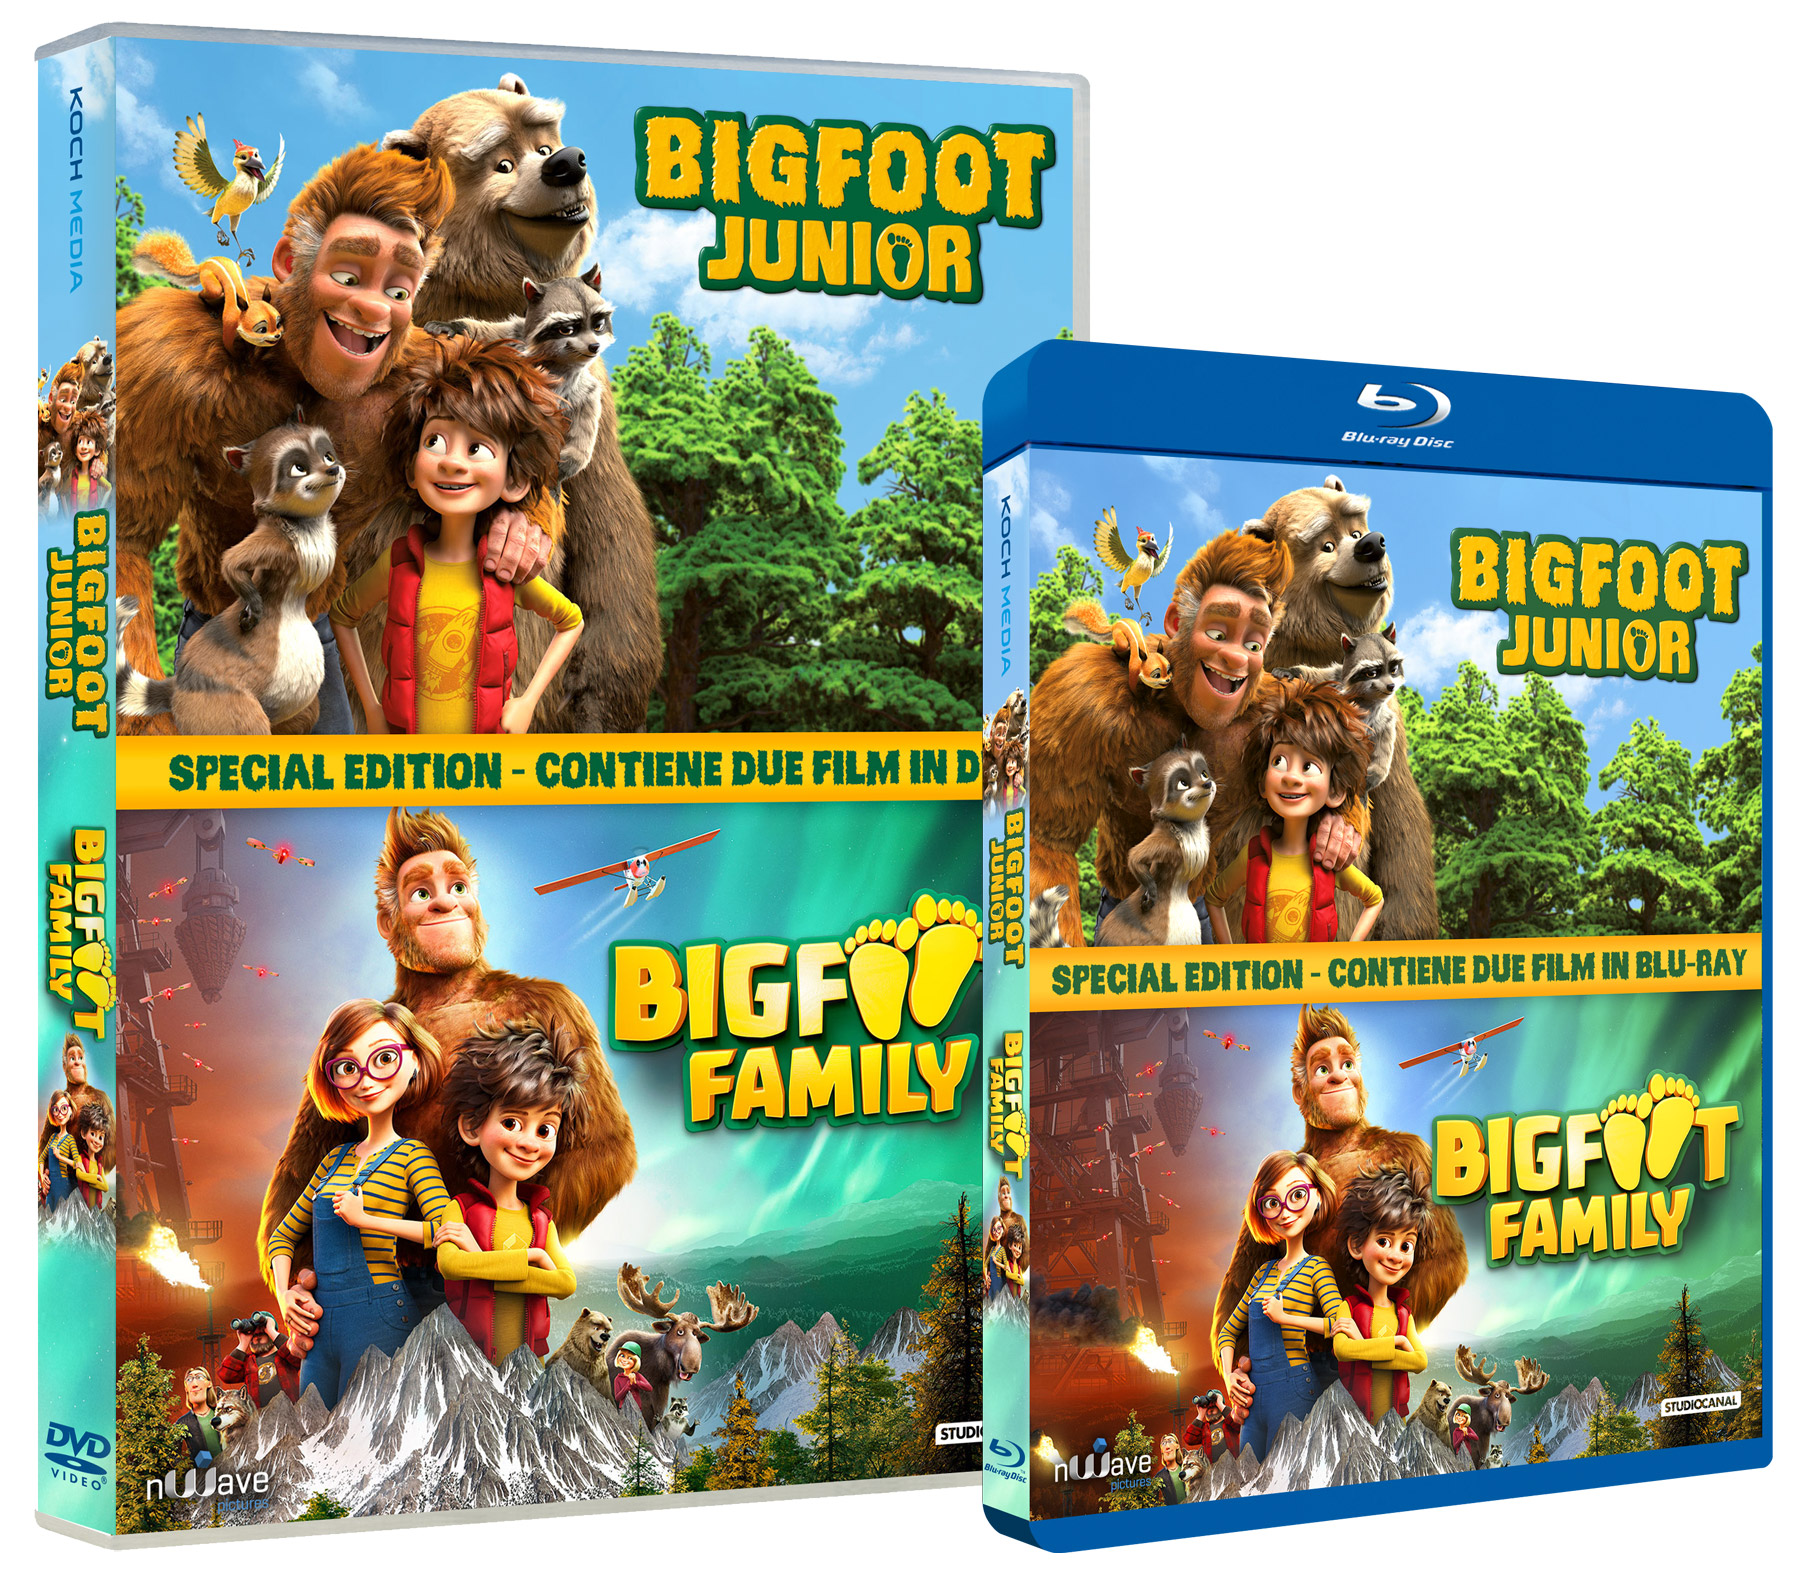 Bigfoot Collection in DVD e Blu-ray